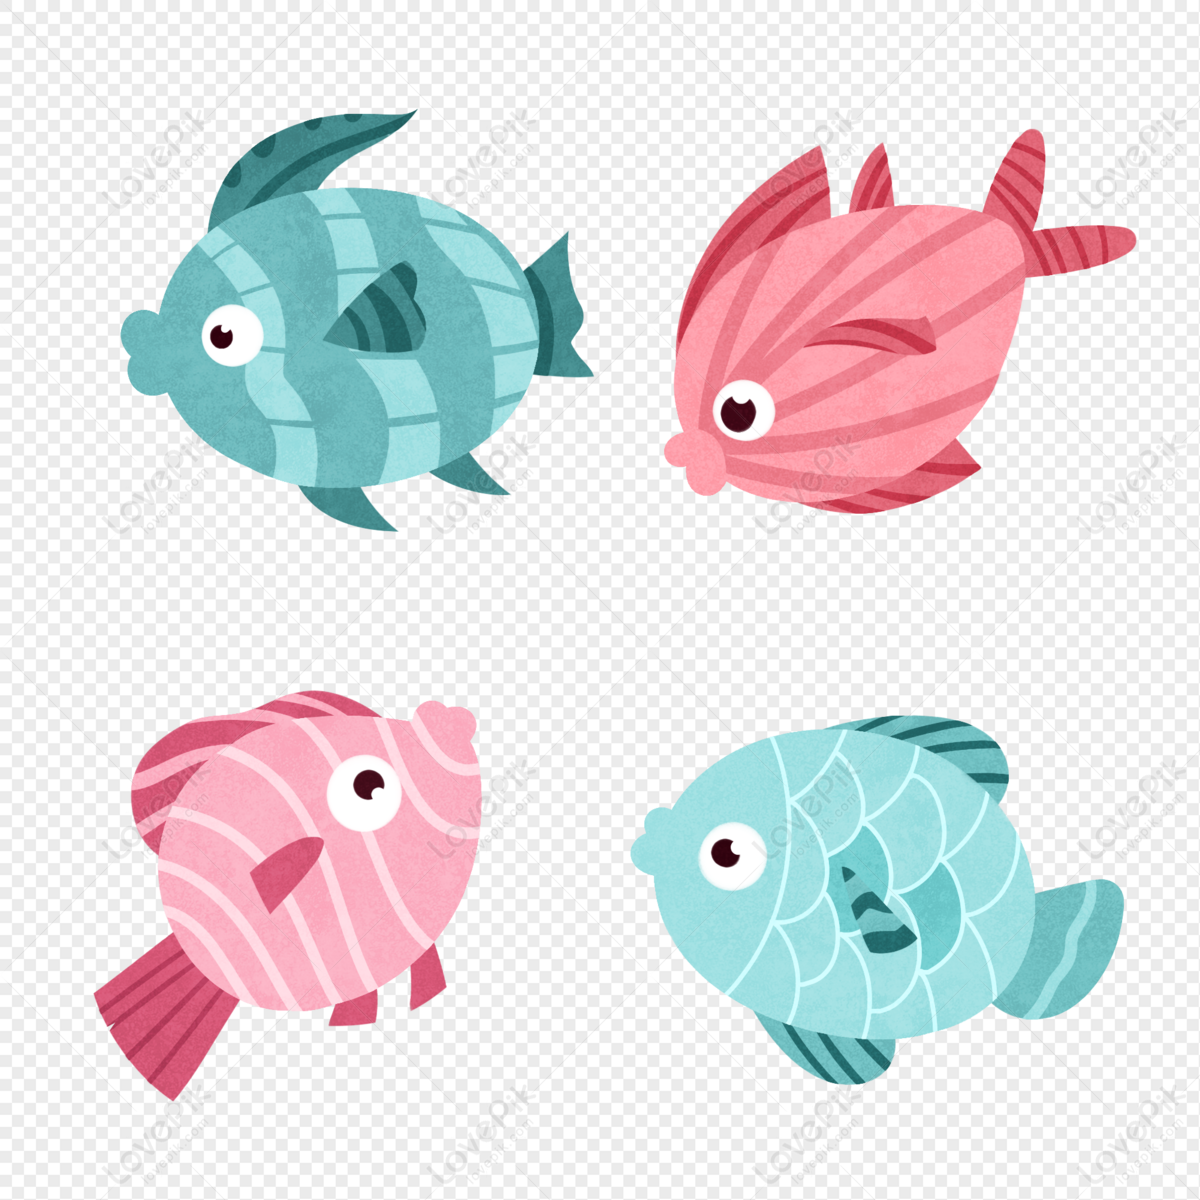 Cartoon Fish PNG Hd Transparent Image And Clipart Image For Free Download -  Lovepik | 401417594